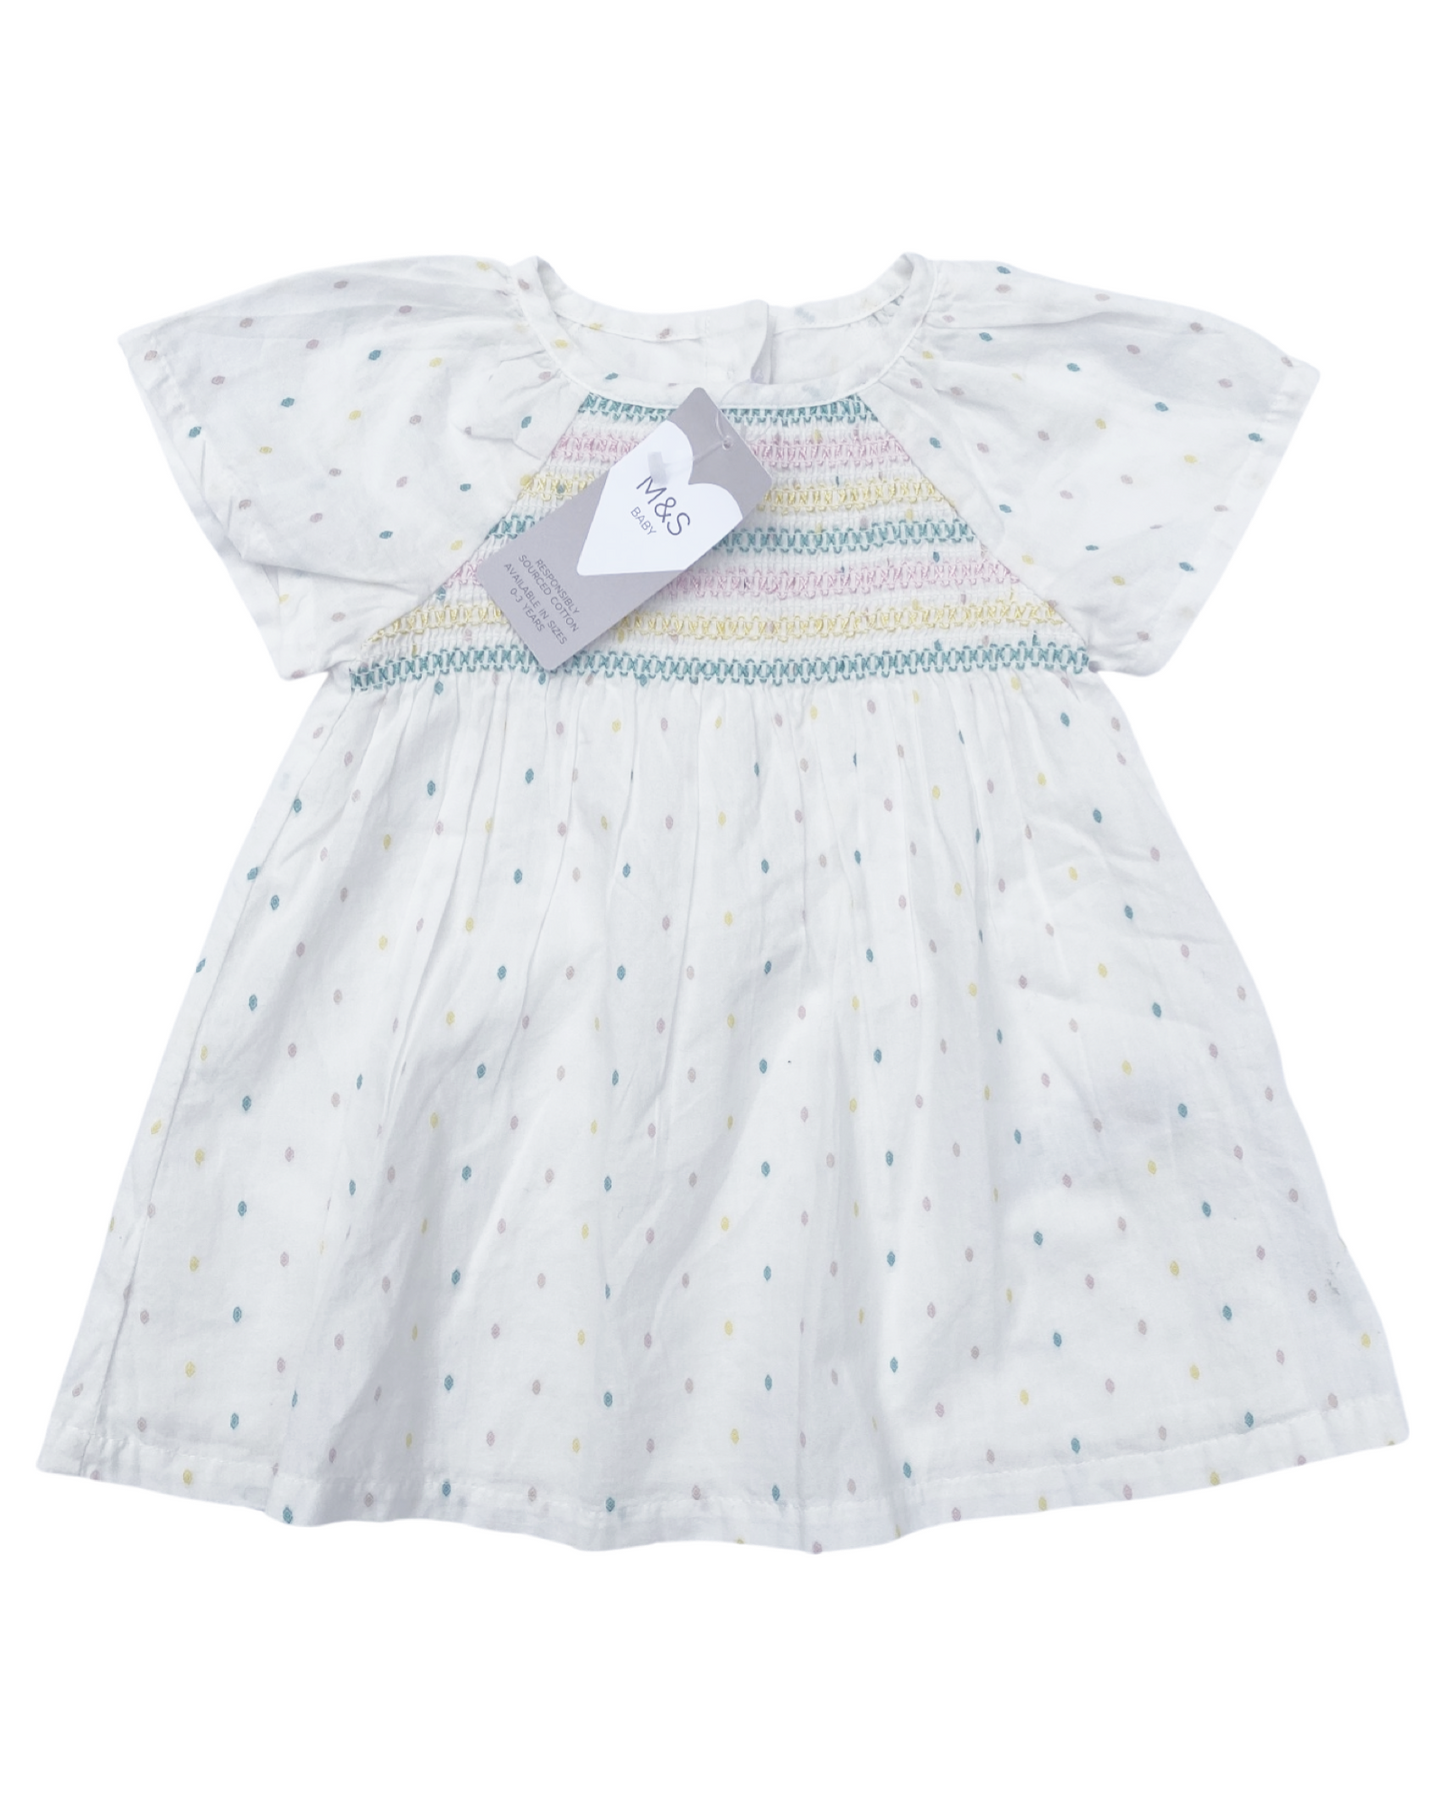 M&S white cotton dotty dress with shirred front (size 3-6mths)